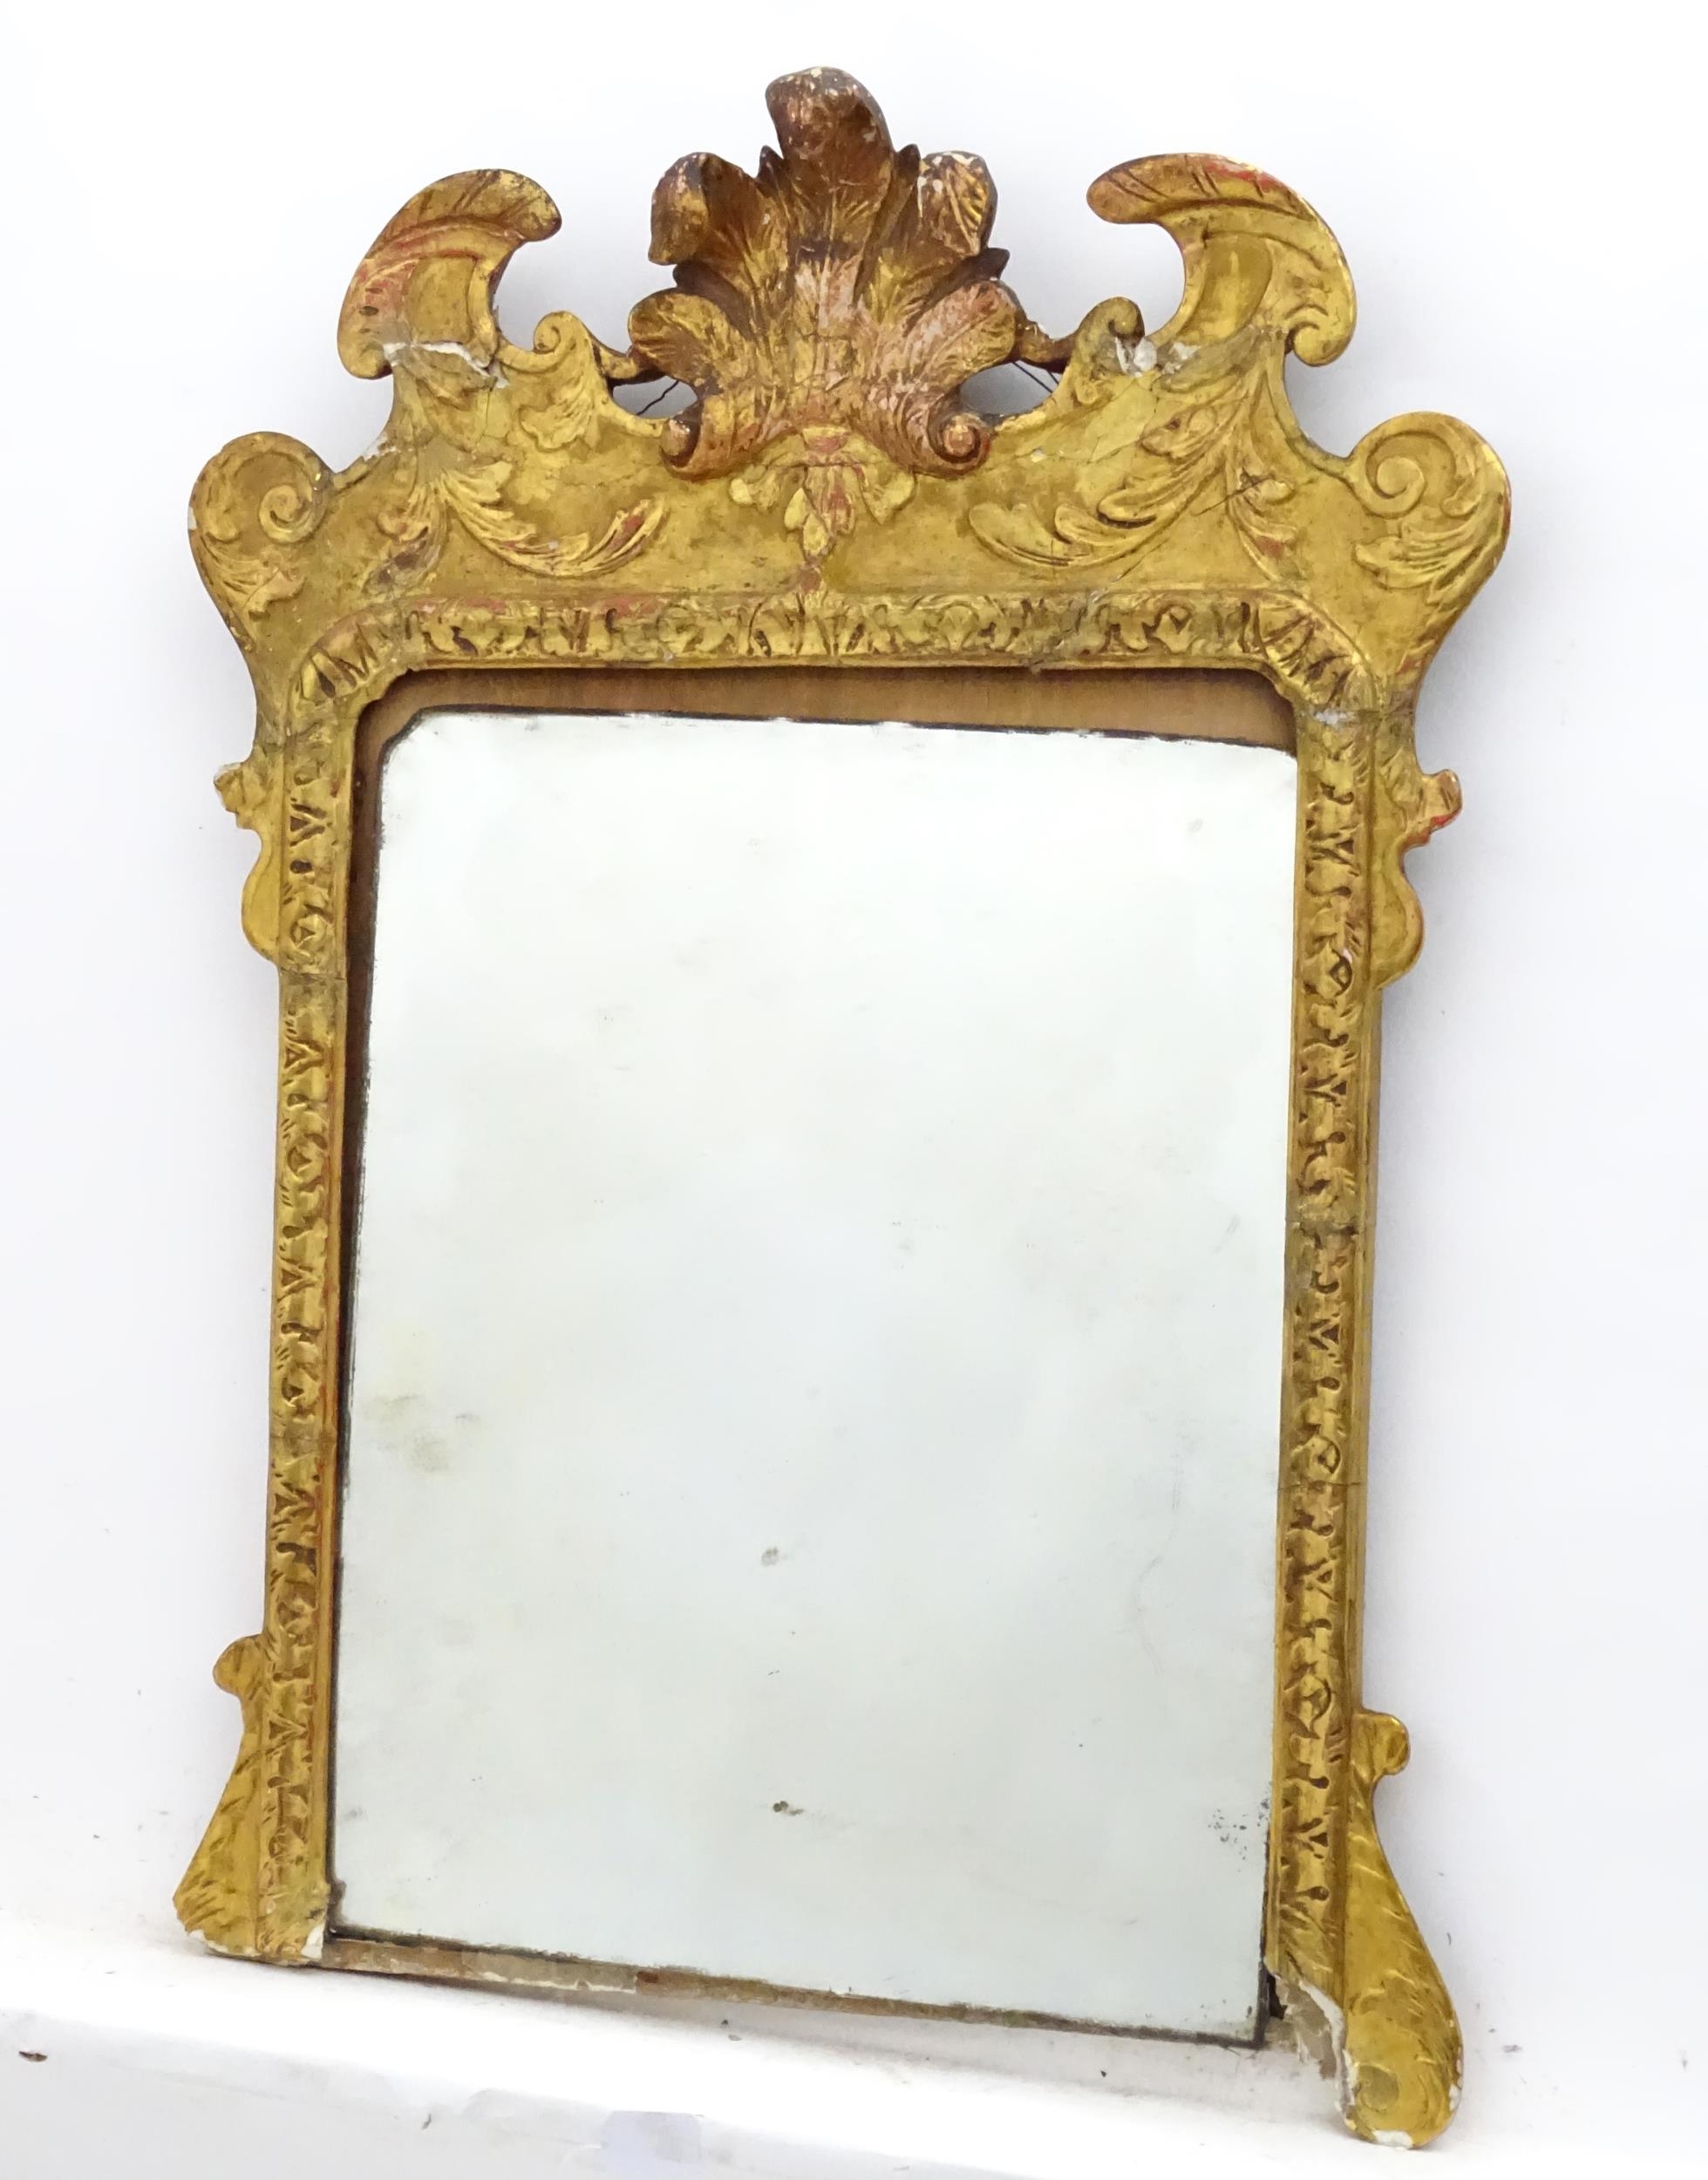 A 19thC gilt mirror with a moulded anthemion to the top and floral decorations to the frame. 23"